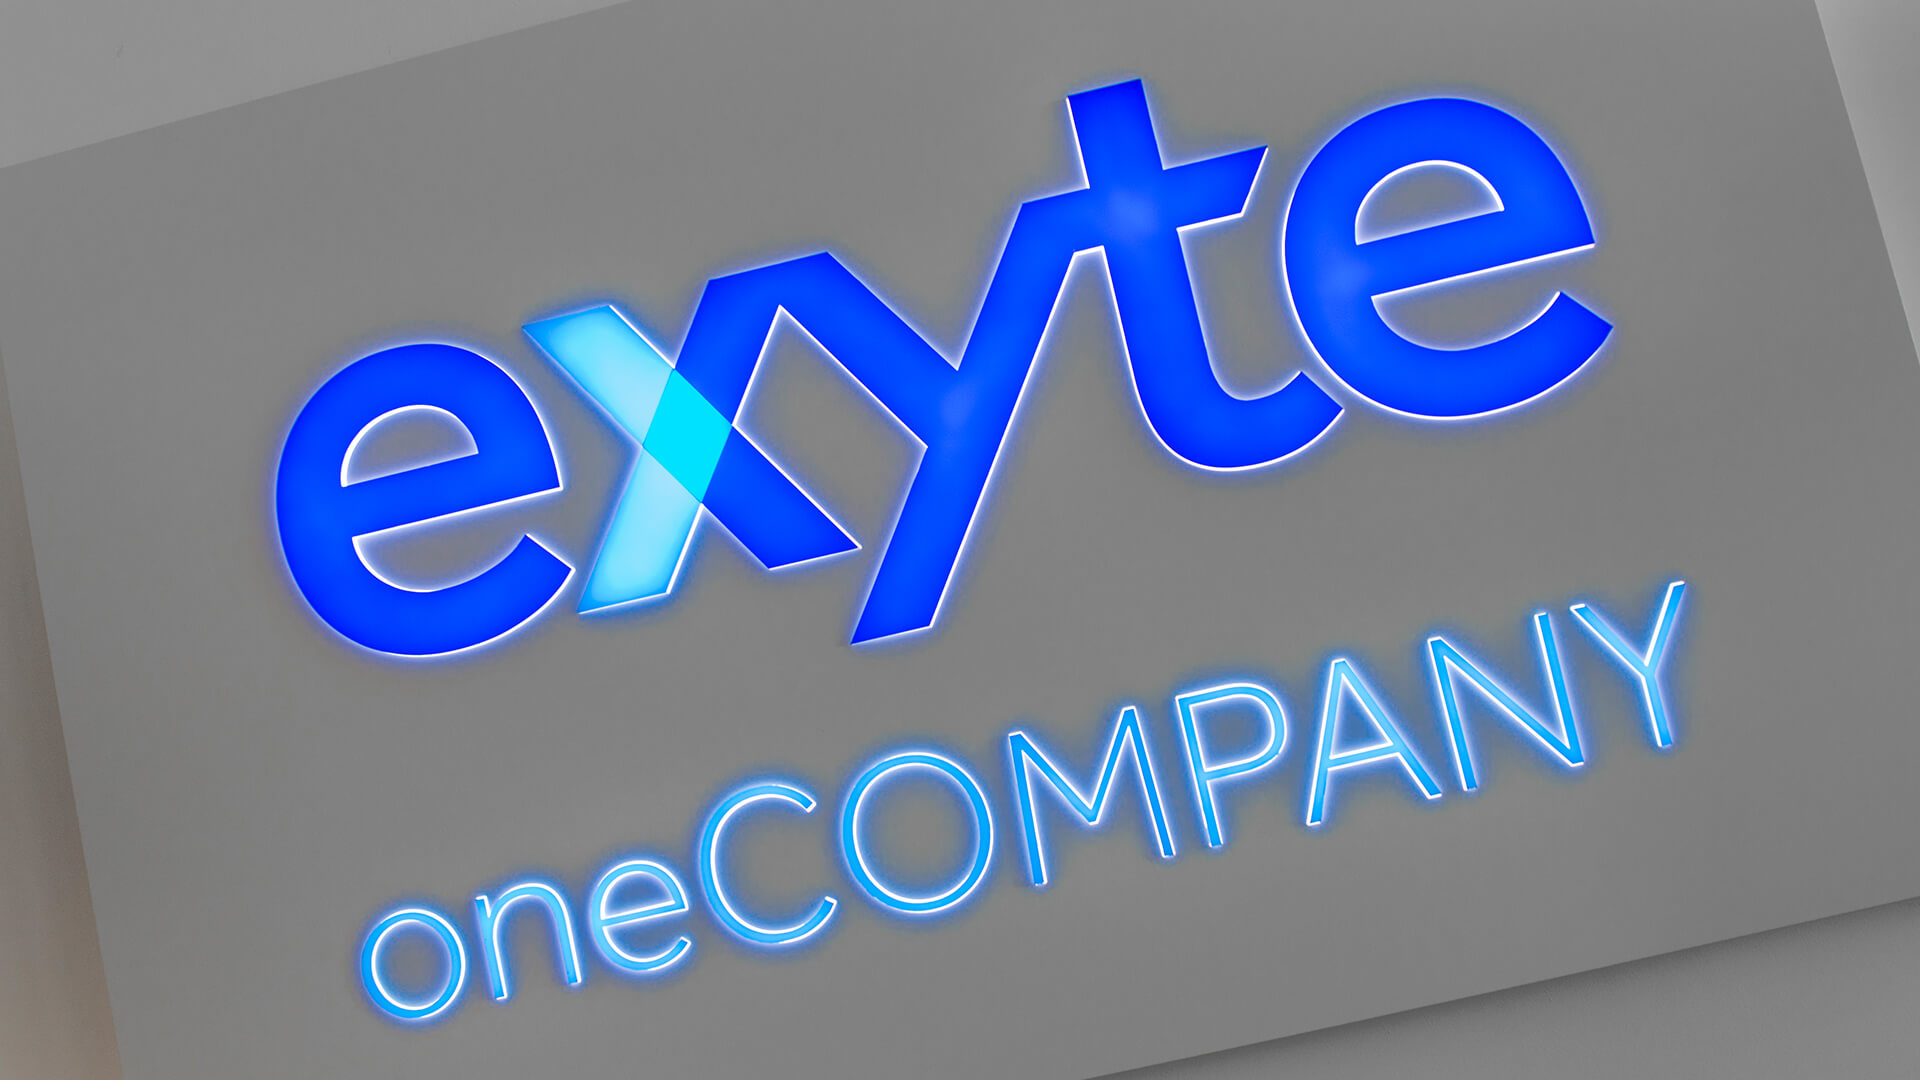 exyte exit exite - exyte-cashonet-on-the-wall-inside-the-office-behind-reception-blue-illuminated-logo-of-the-firm-cashonet-on-order-gdansk-technological-and-scientific-park